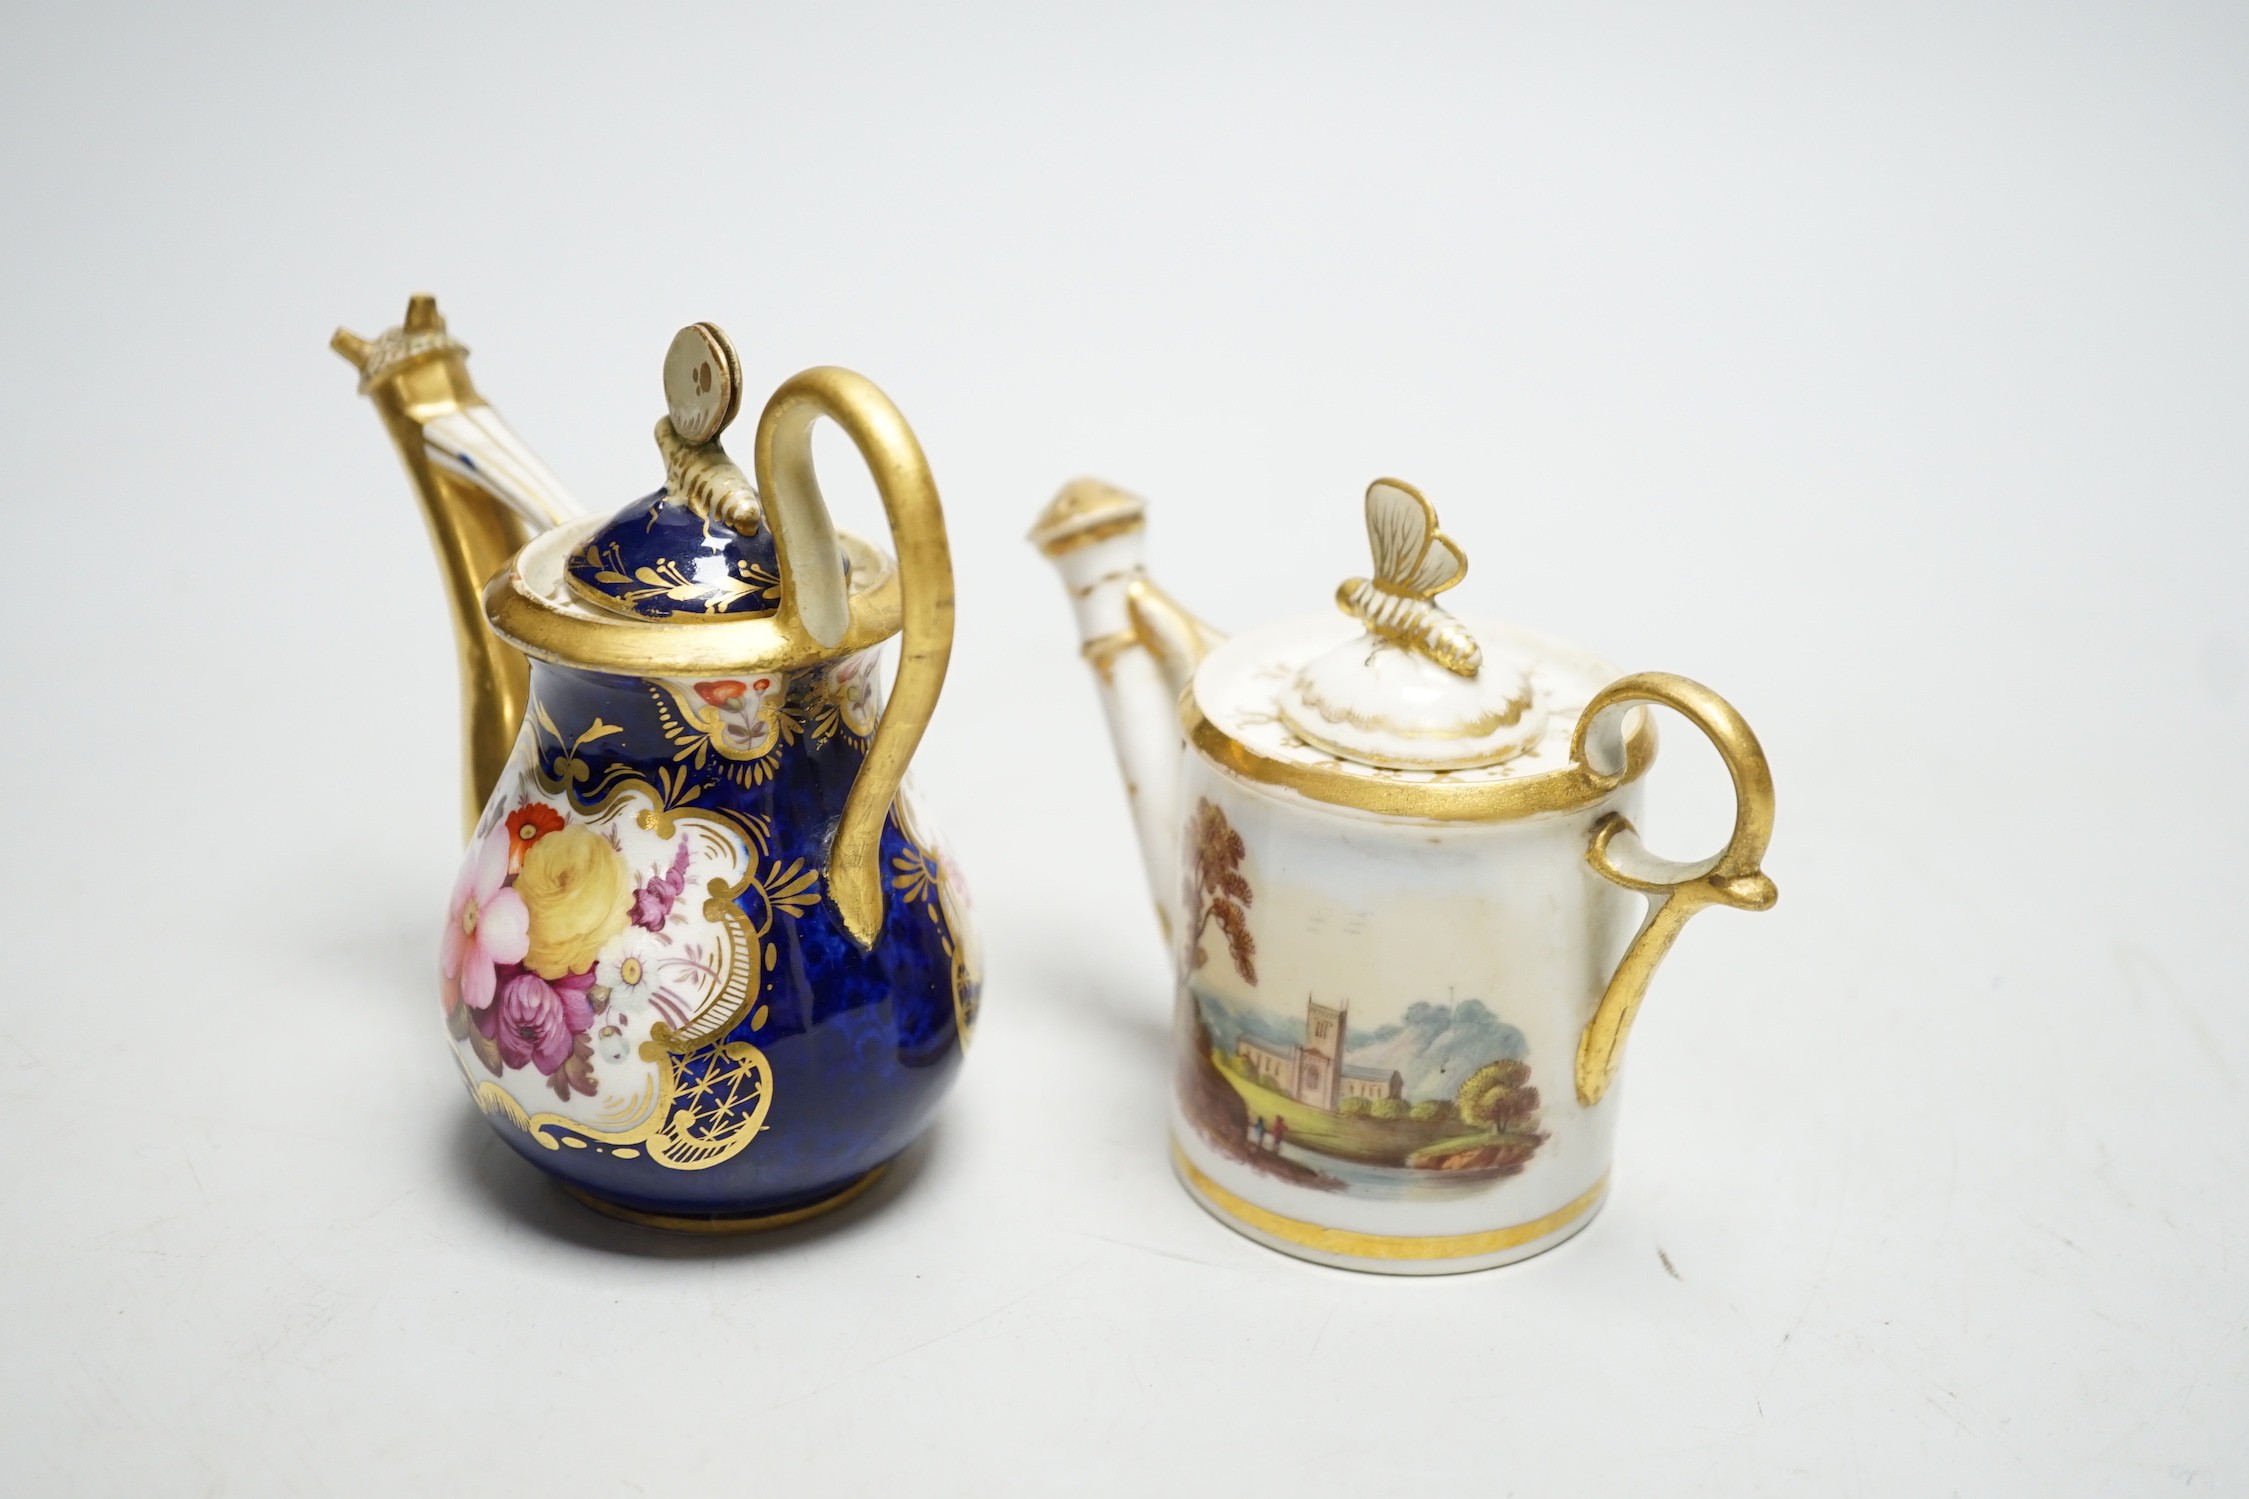 Toy porcelain: two English rosewater sprinklers, c.1810-1820, possibly Coalport, each modelled in the form of a watering can